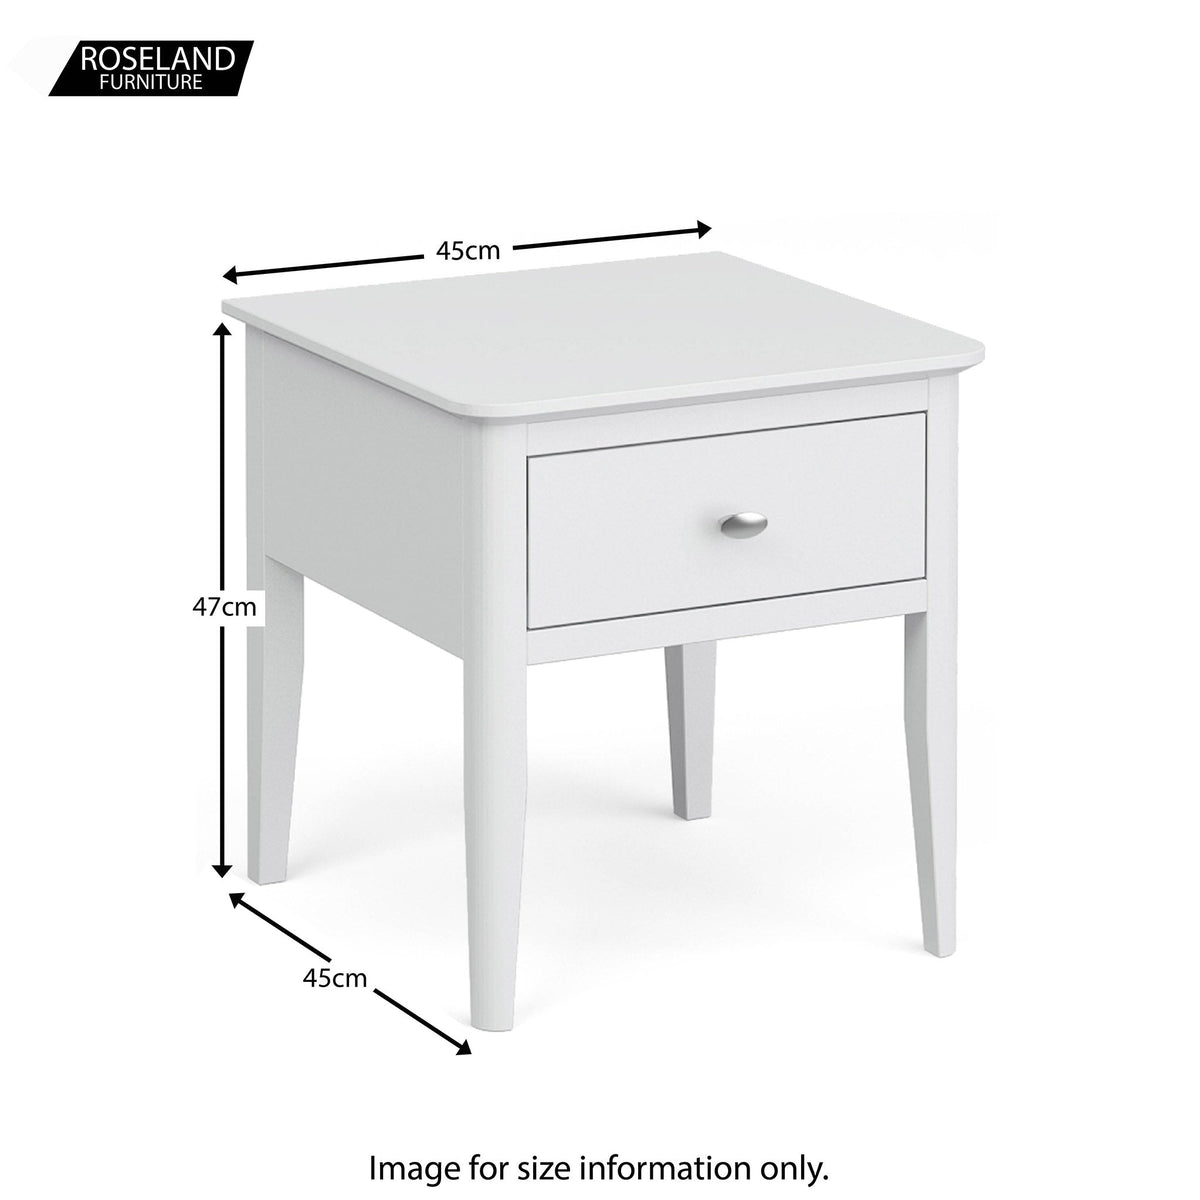 Chester White Lamp Side Table - Size Guide